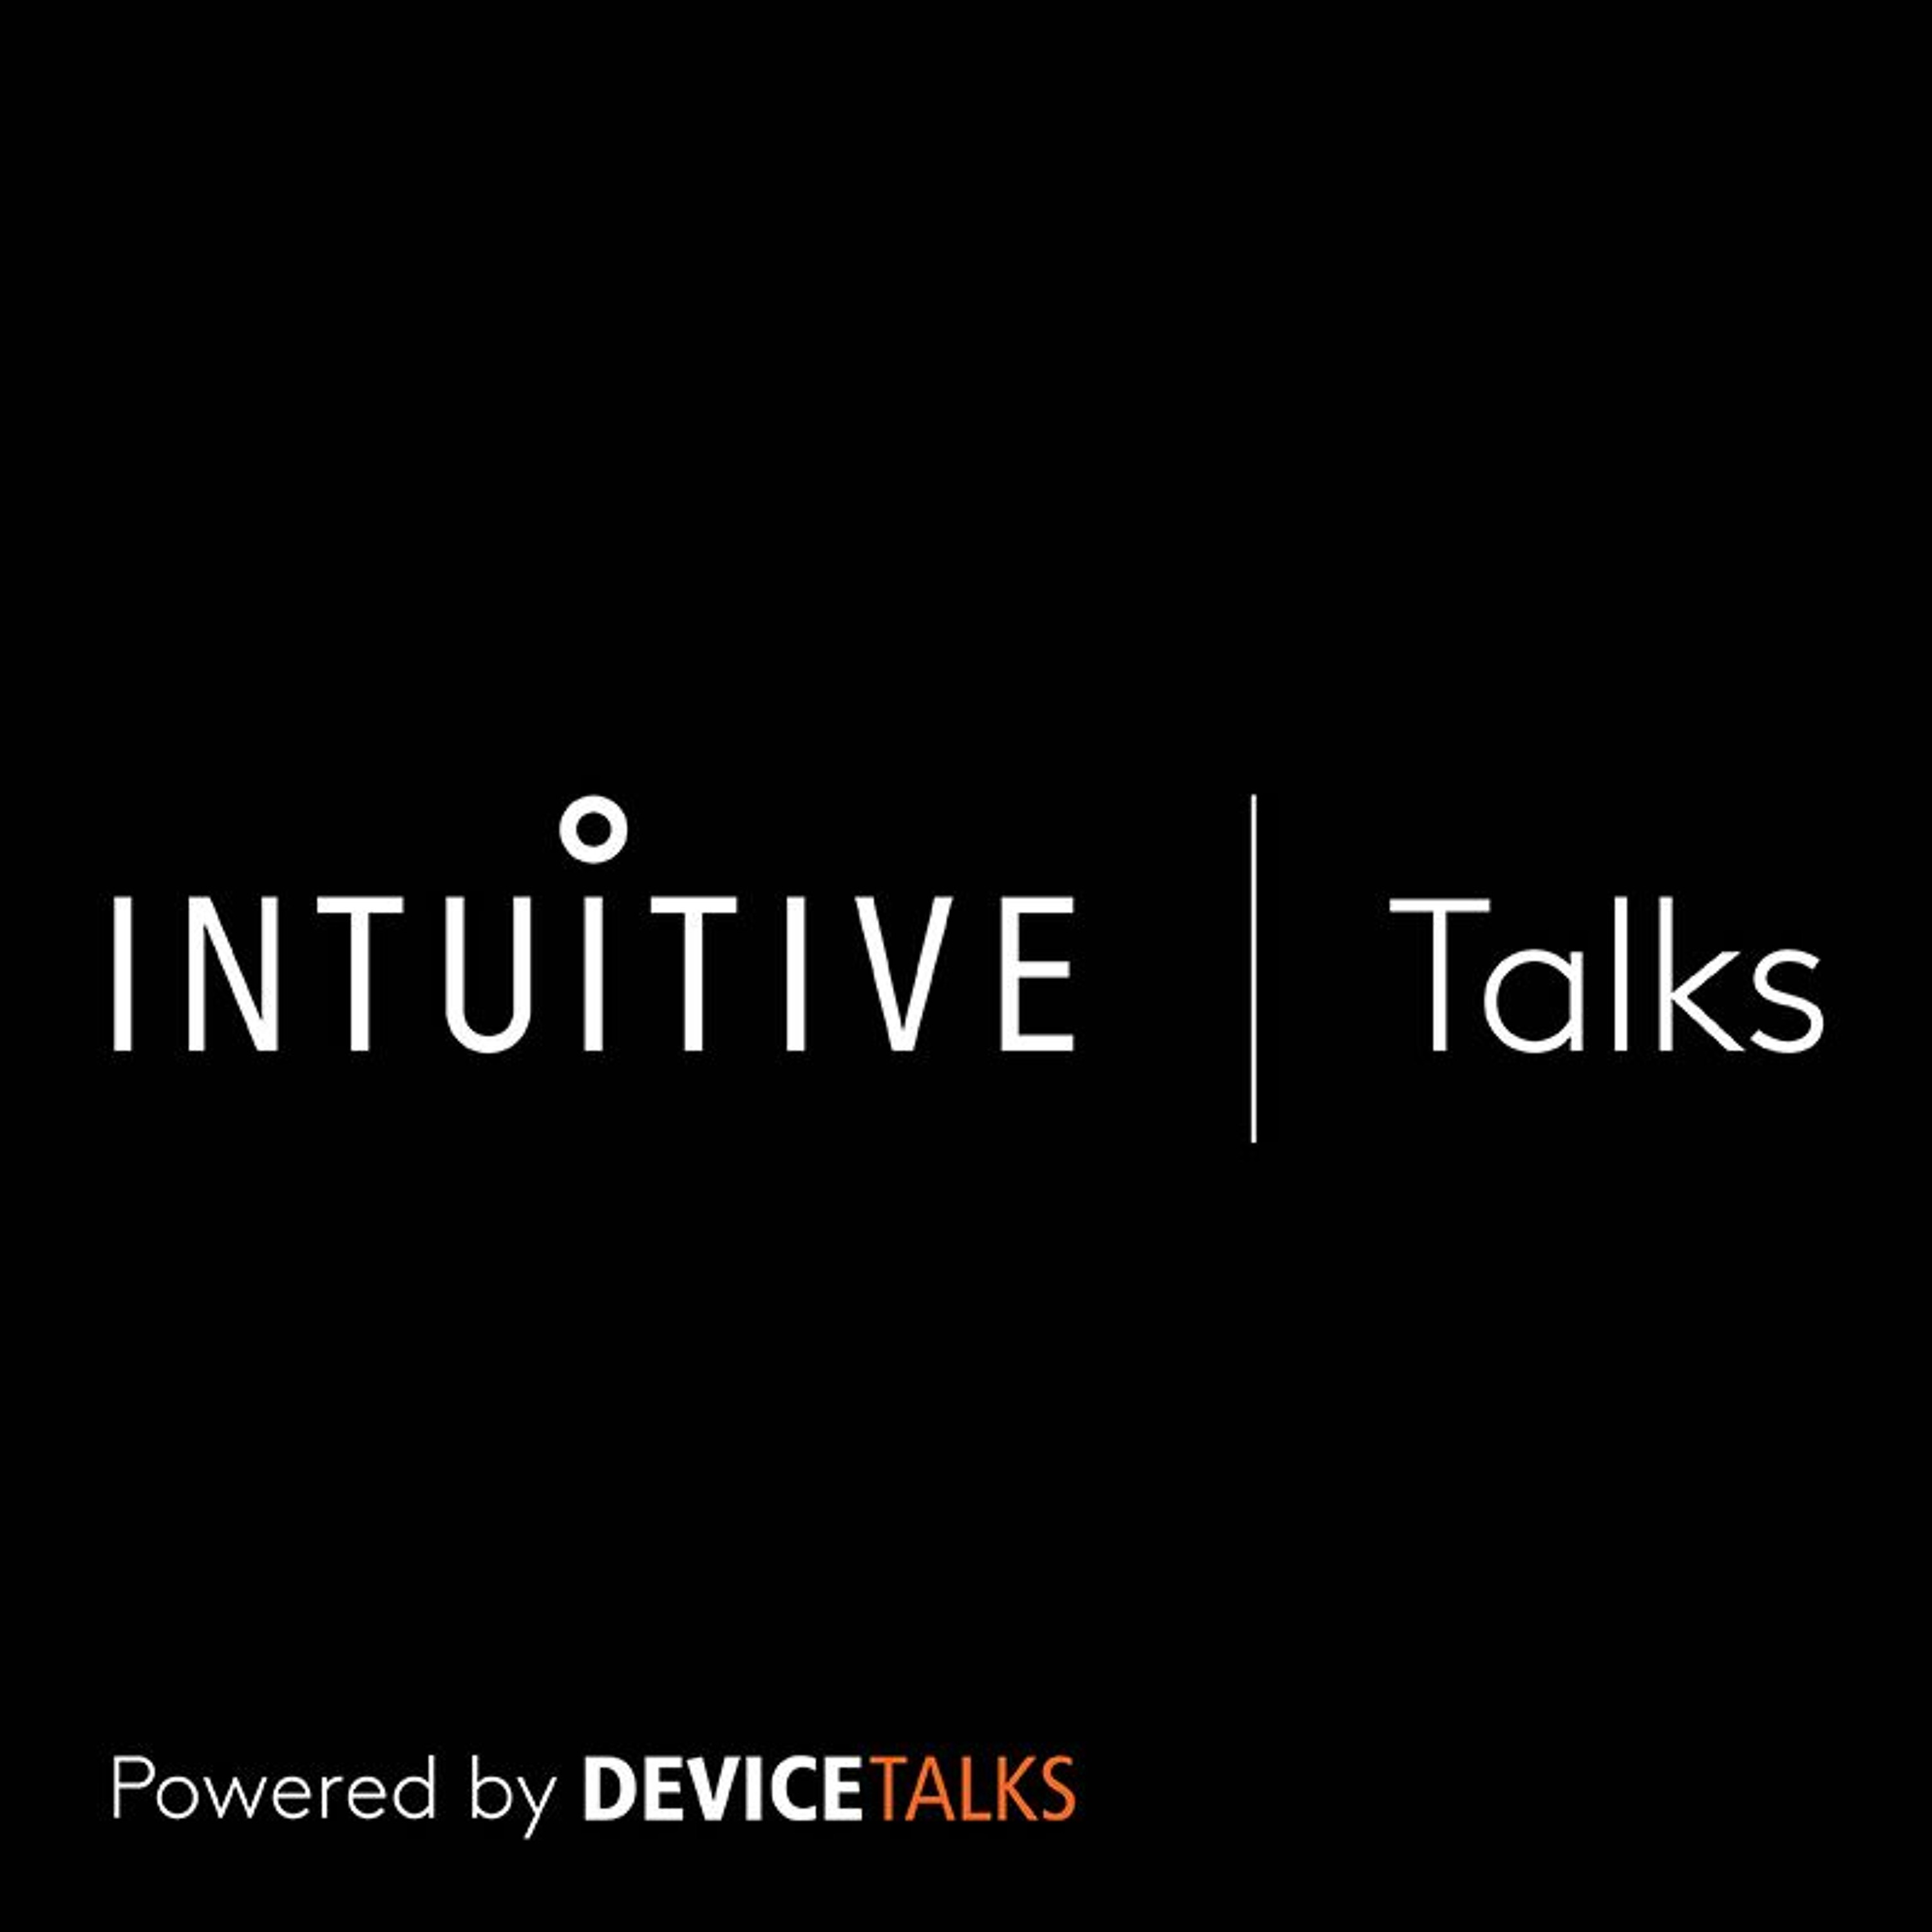 IntuitiveTalks – How a new venture group keeps Intuitive’s eyes focused forward on the future